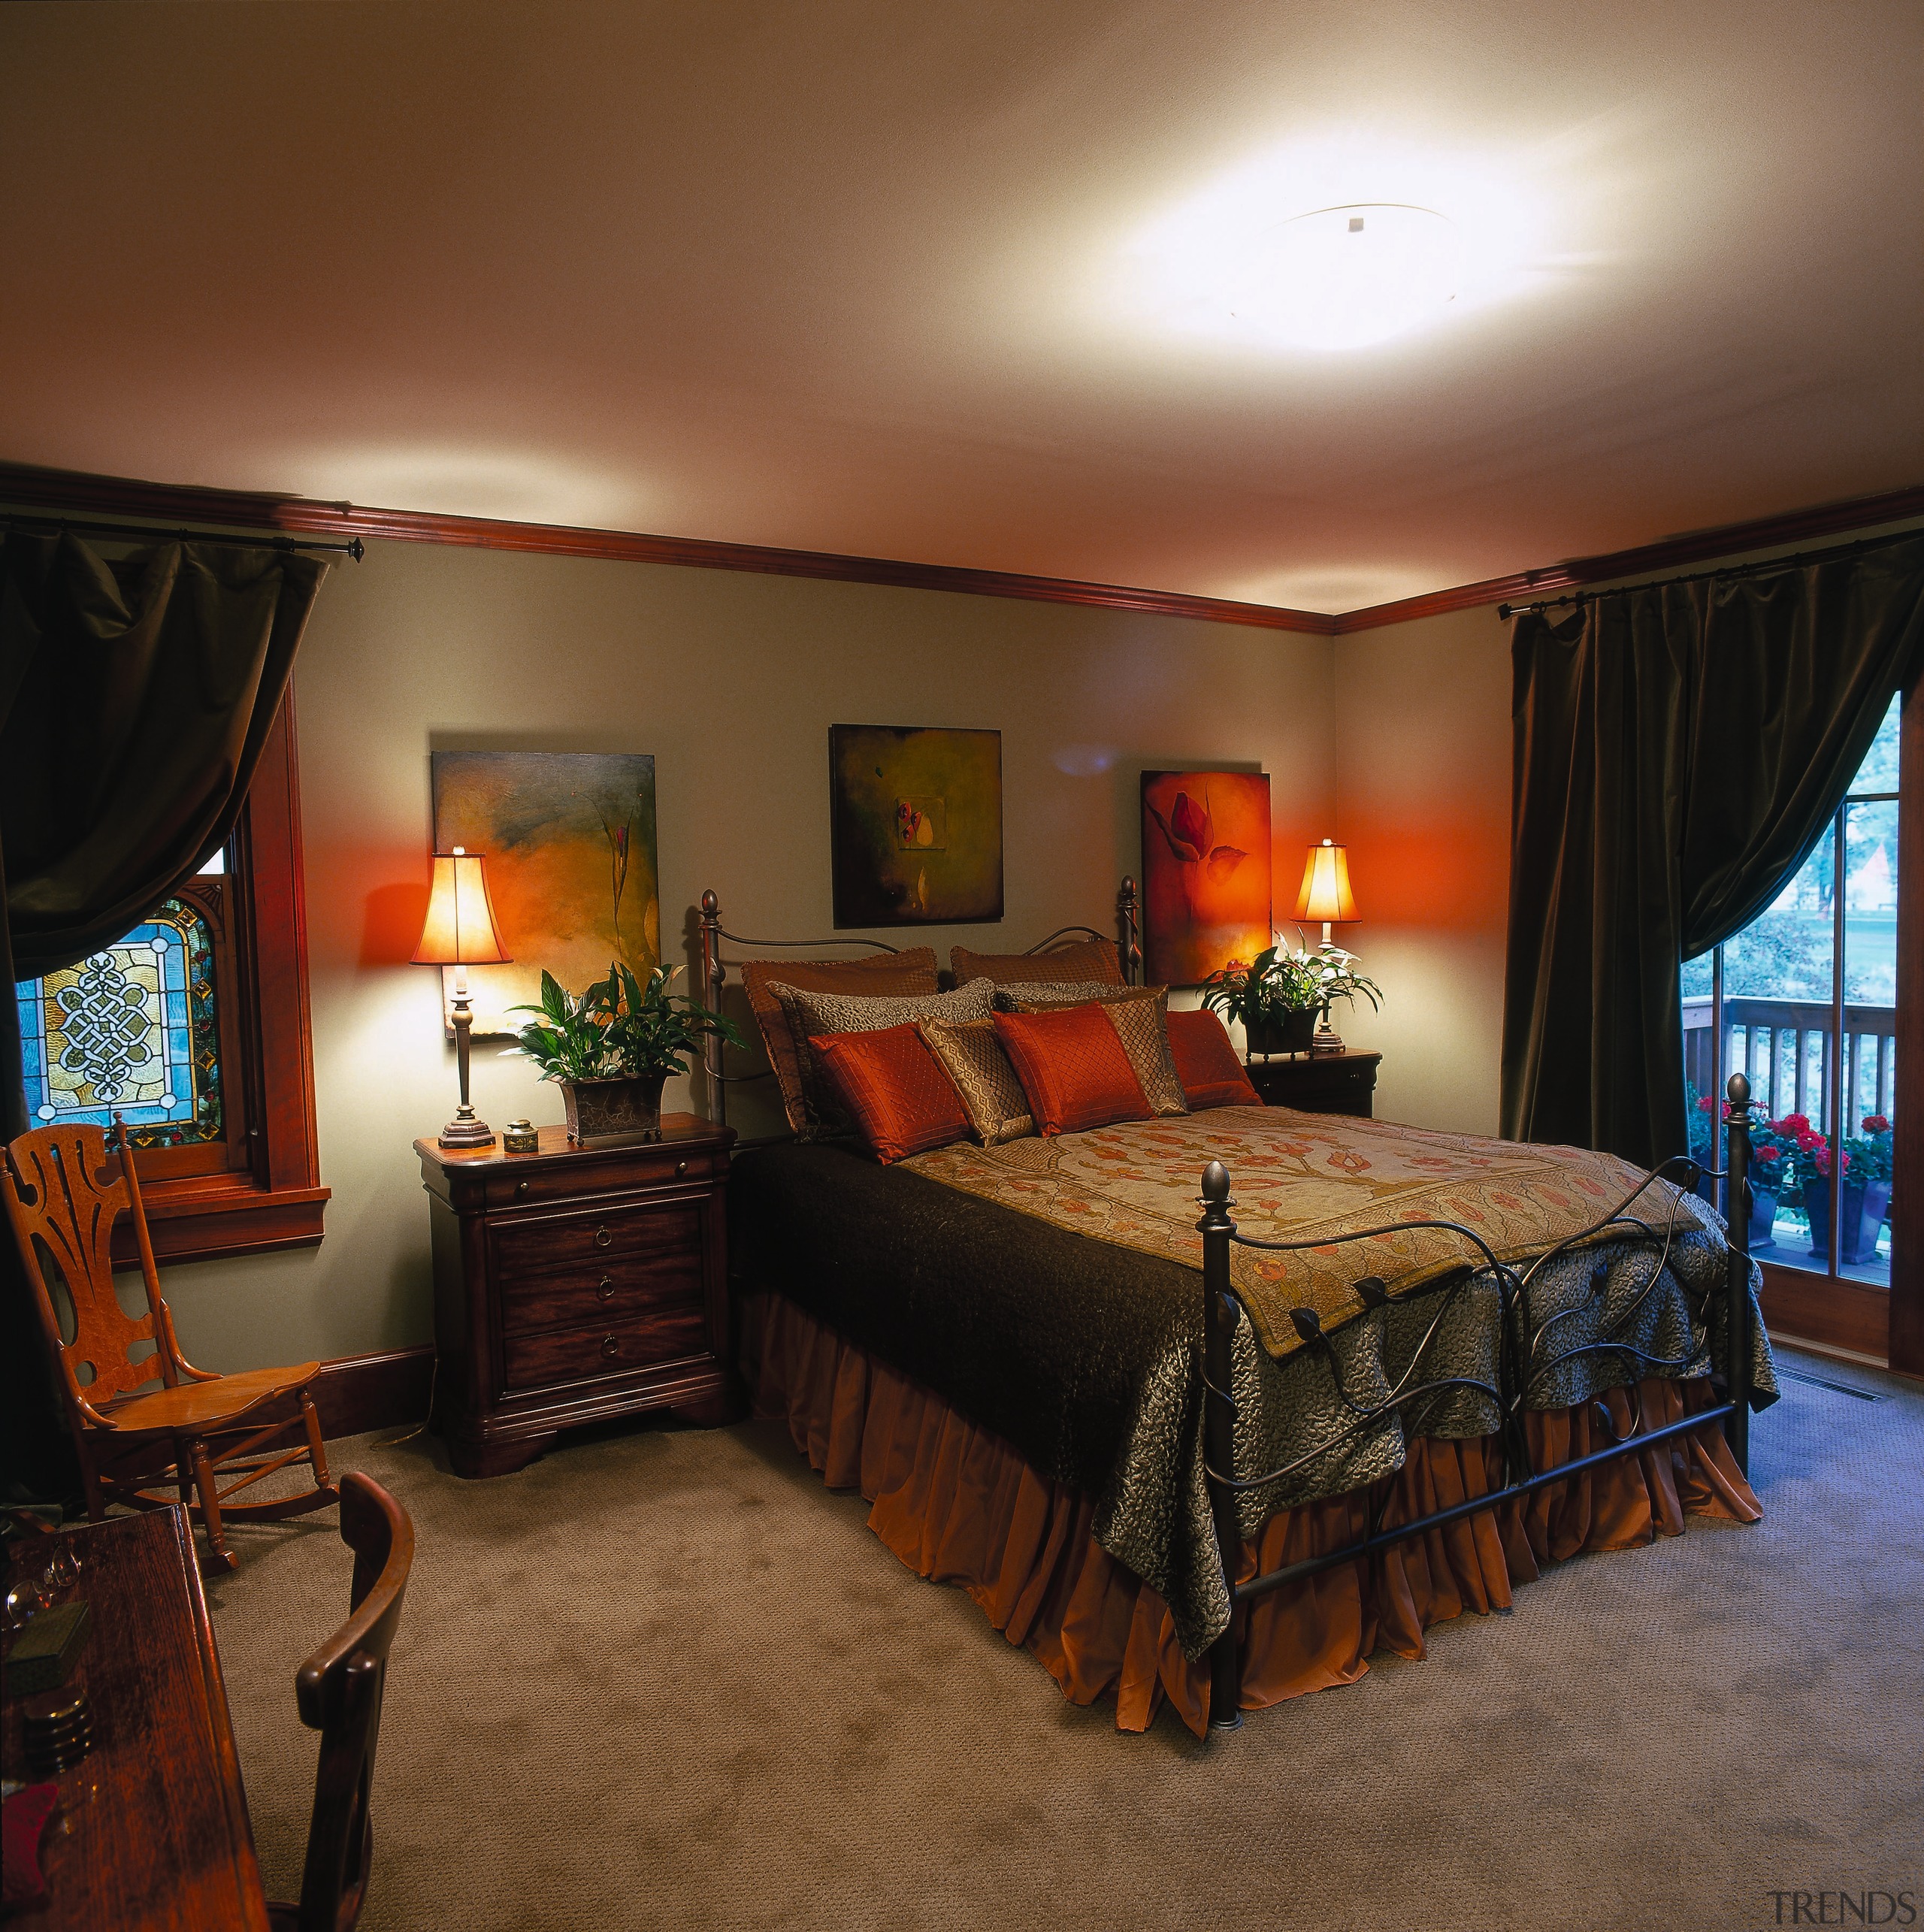 View of the bedroom - View of the bedroom, ceiling, home, interior design, real estate, room, suite, brown